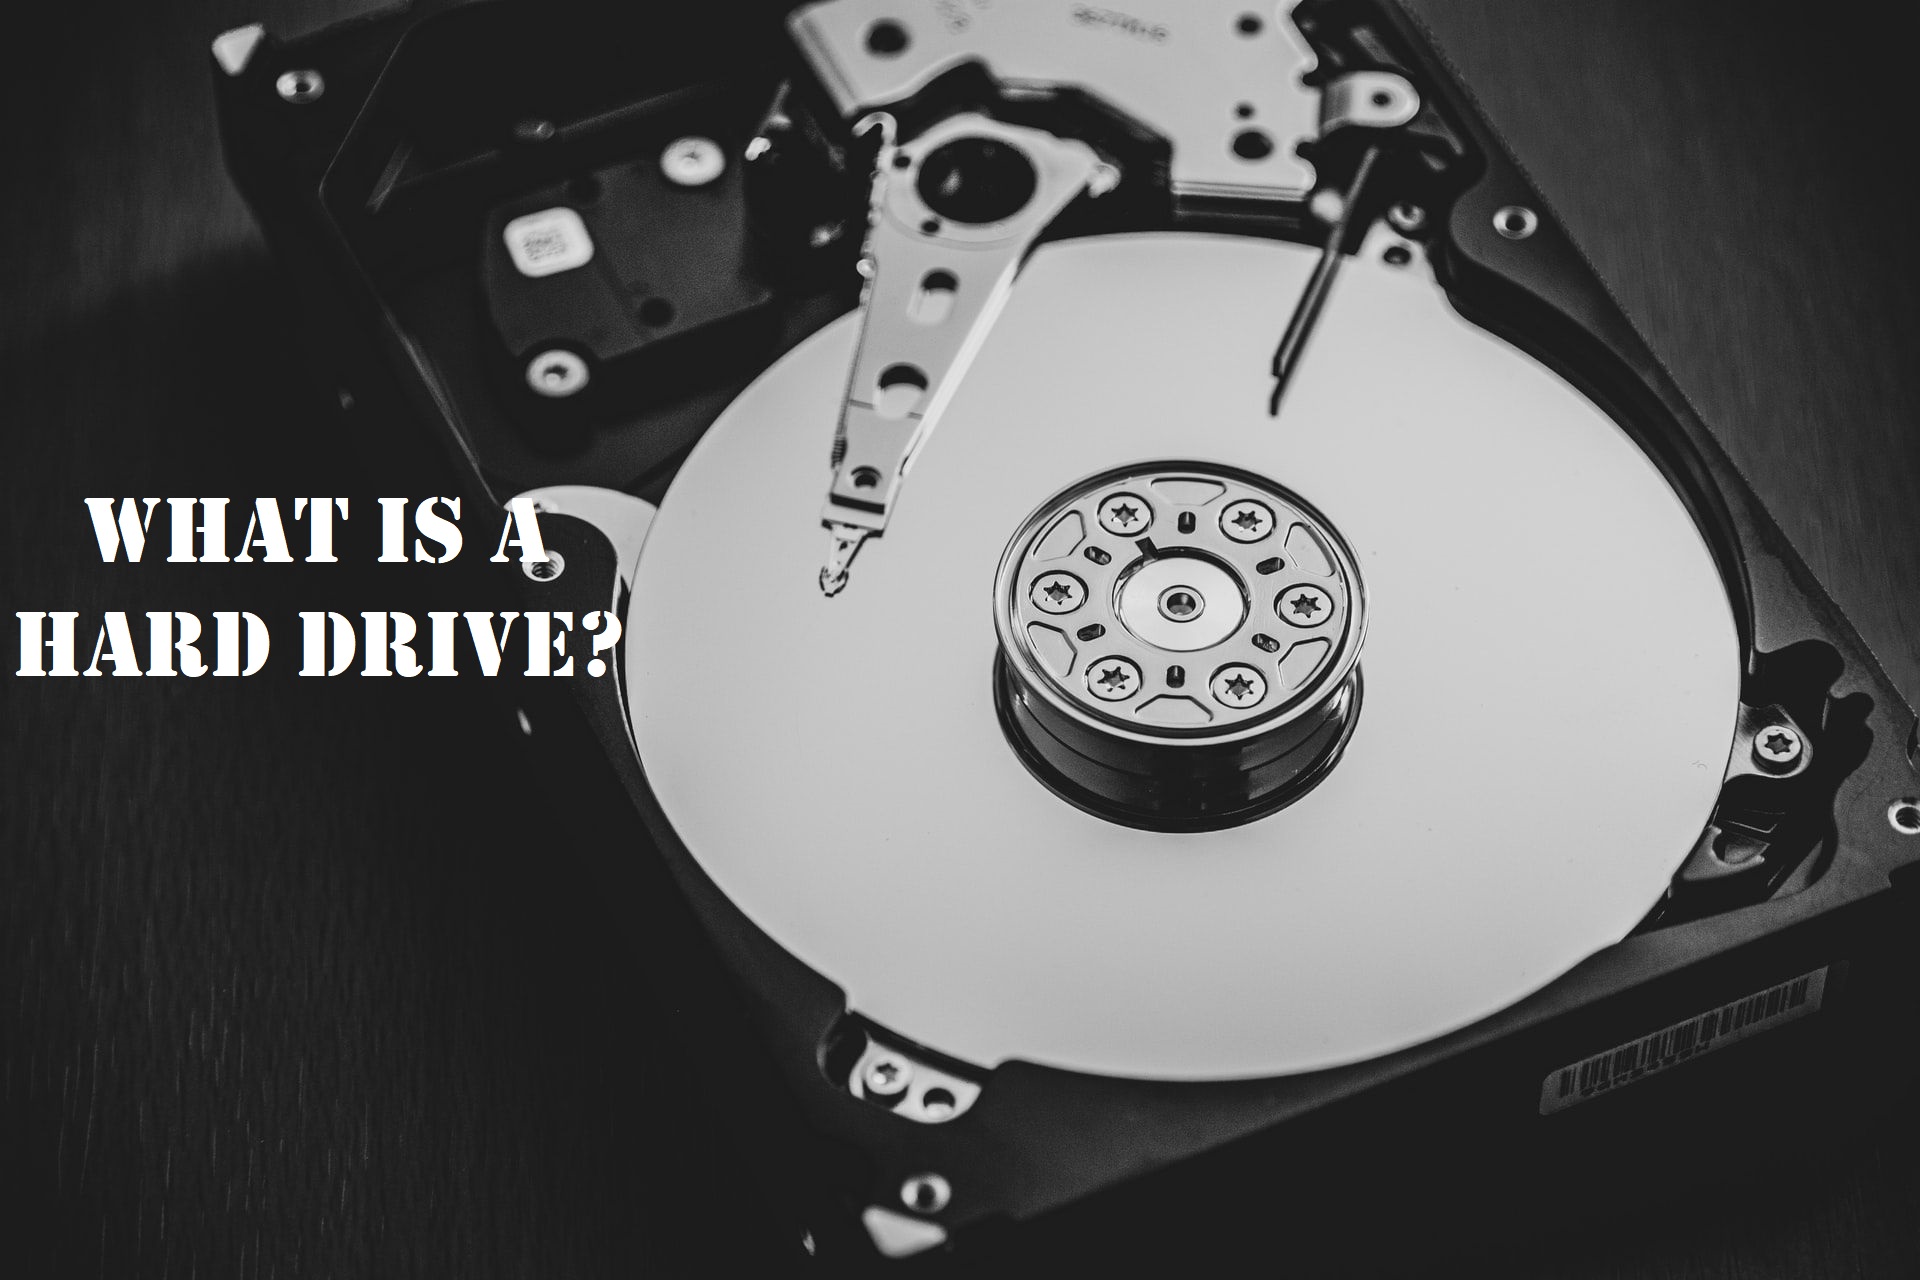 What is a hard drive